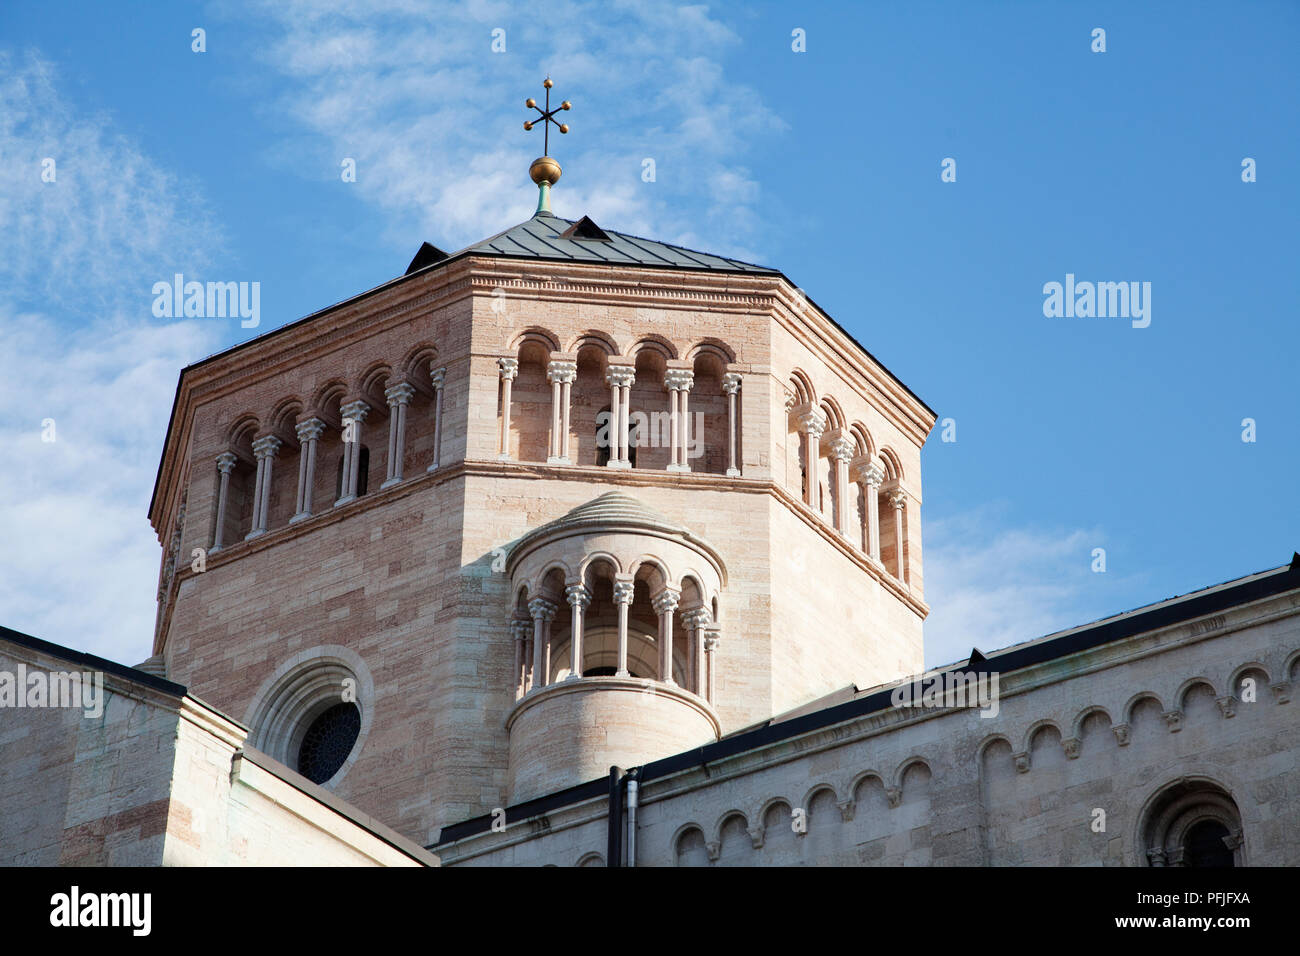 Top of Trento cathedral, view from below Stock Photo